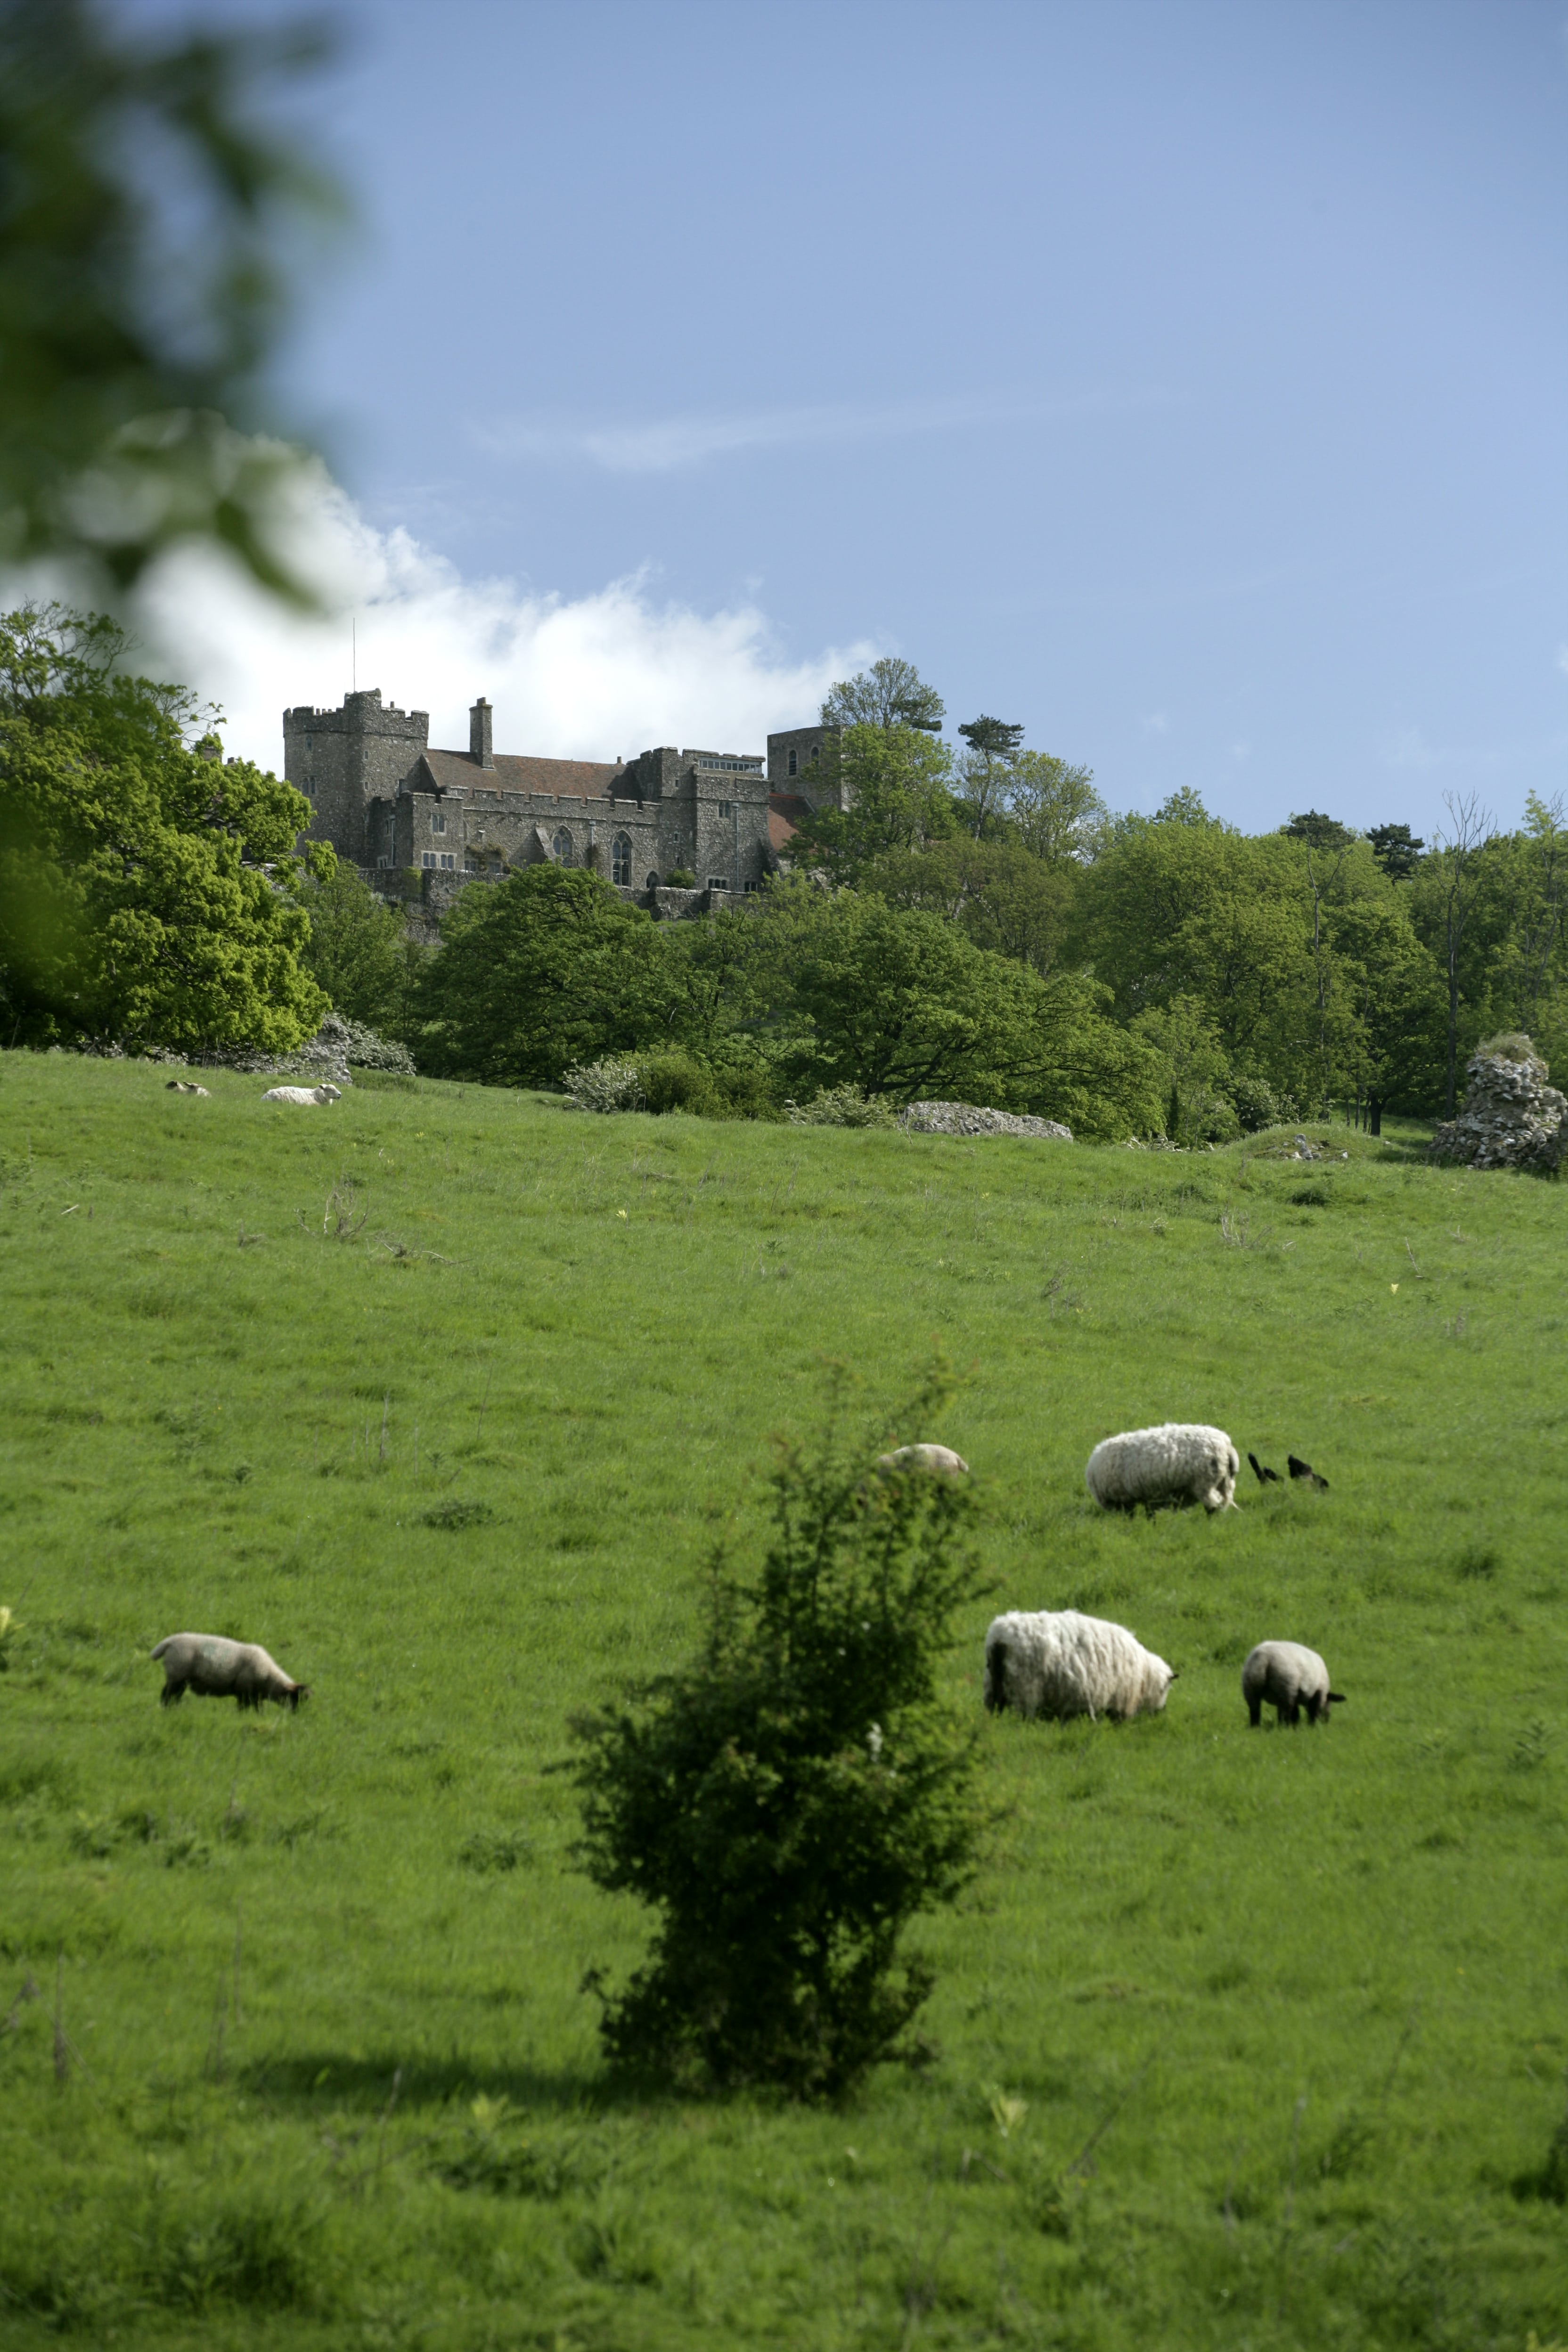 Sheep grazing in grass field, with trees and Lympne Castle, in the distance.